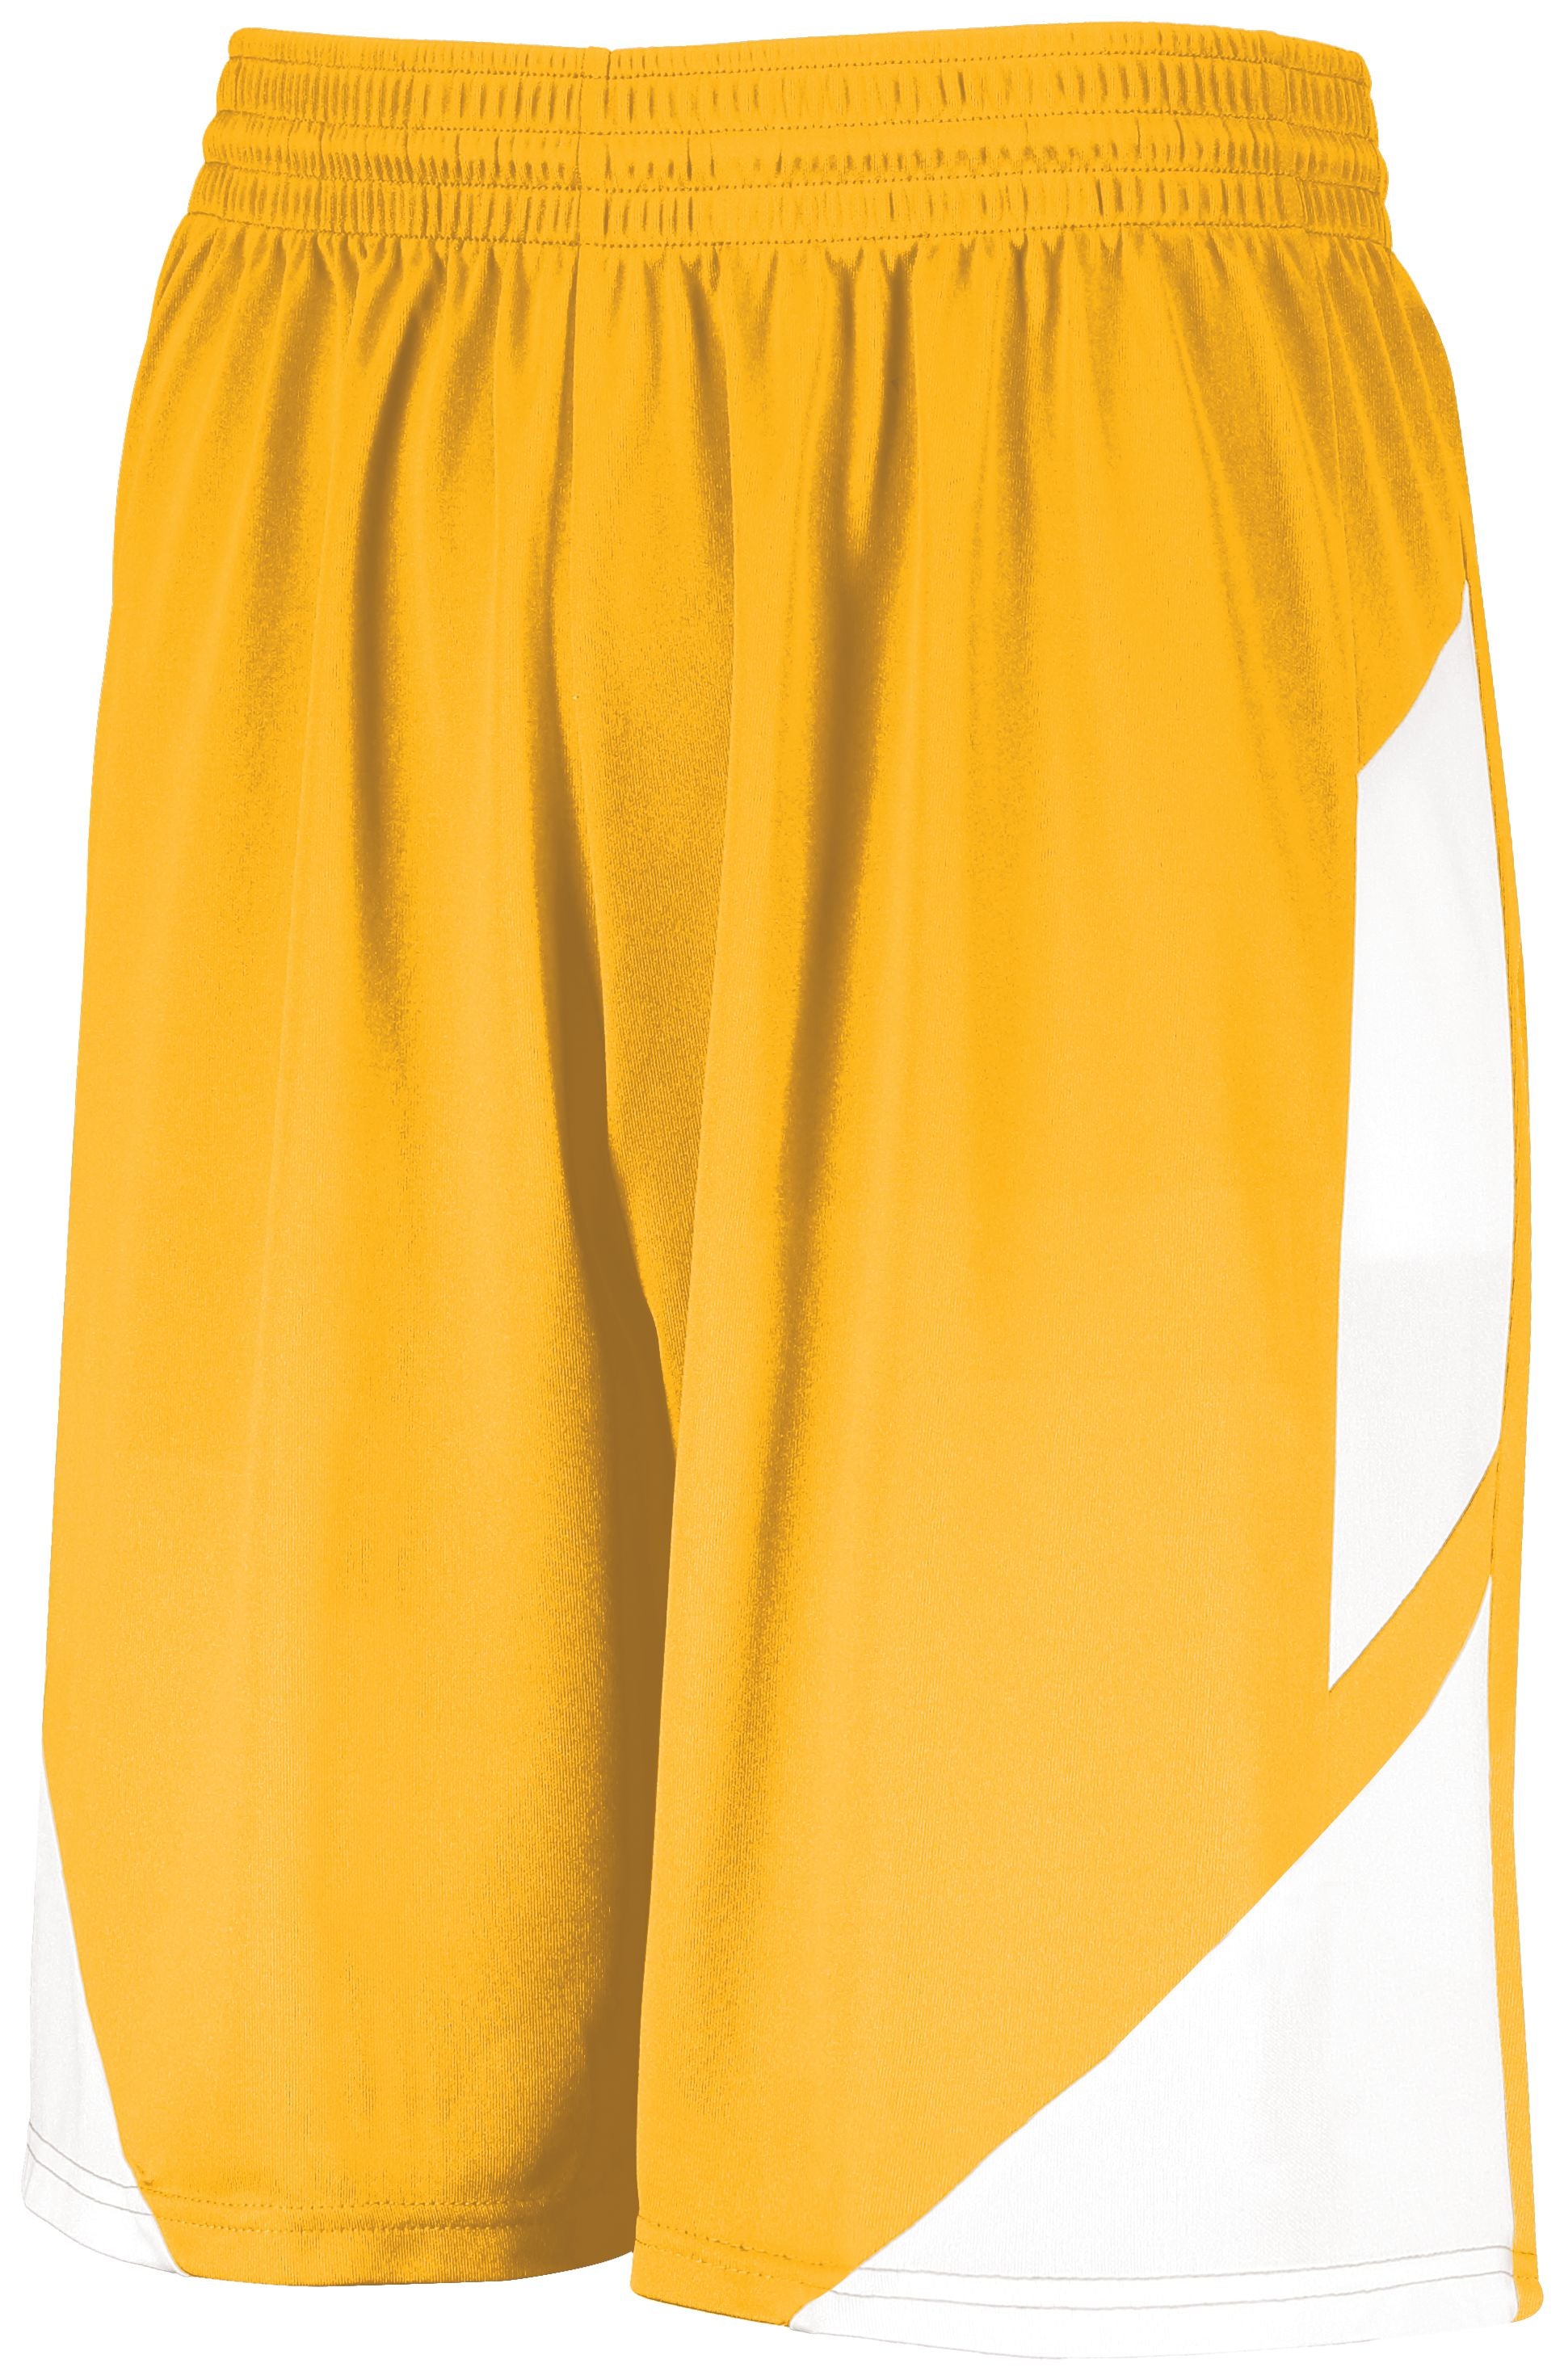 Augusta Sportswear Step-Back Basketball Shorts in Gold/White  -Part of the Adult, Adult-Shorts, Augusta-Products, Basketball, All-Sports, All-Sports-1 product lines at KanaleyCreations.com